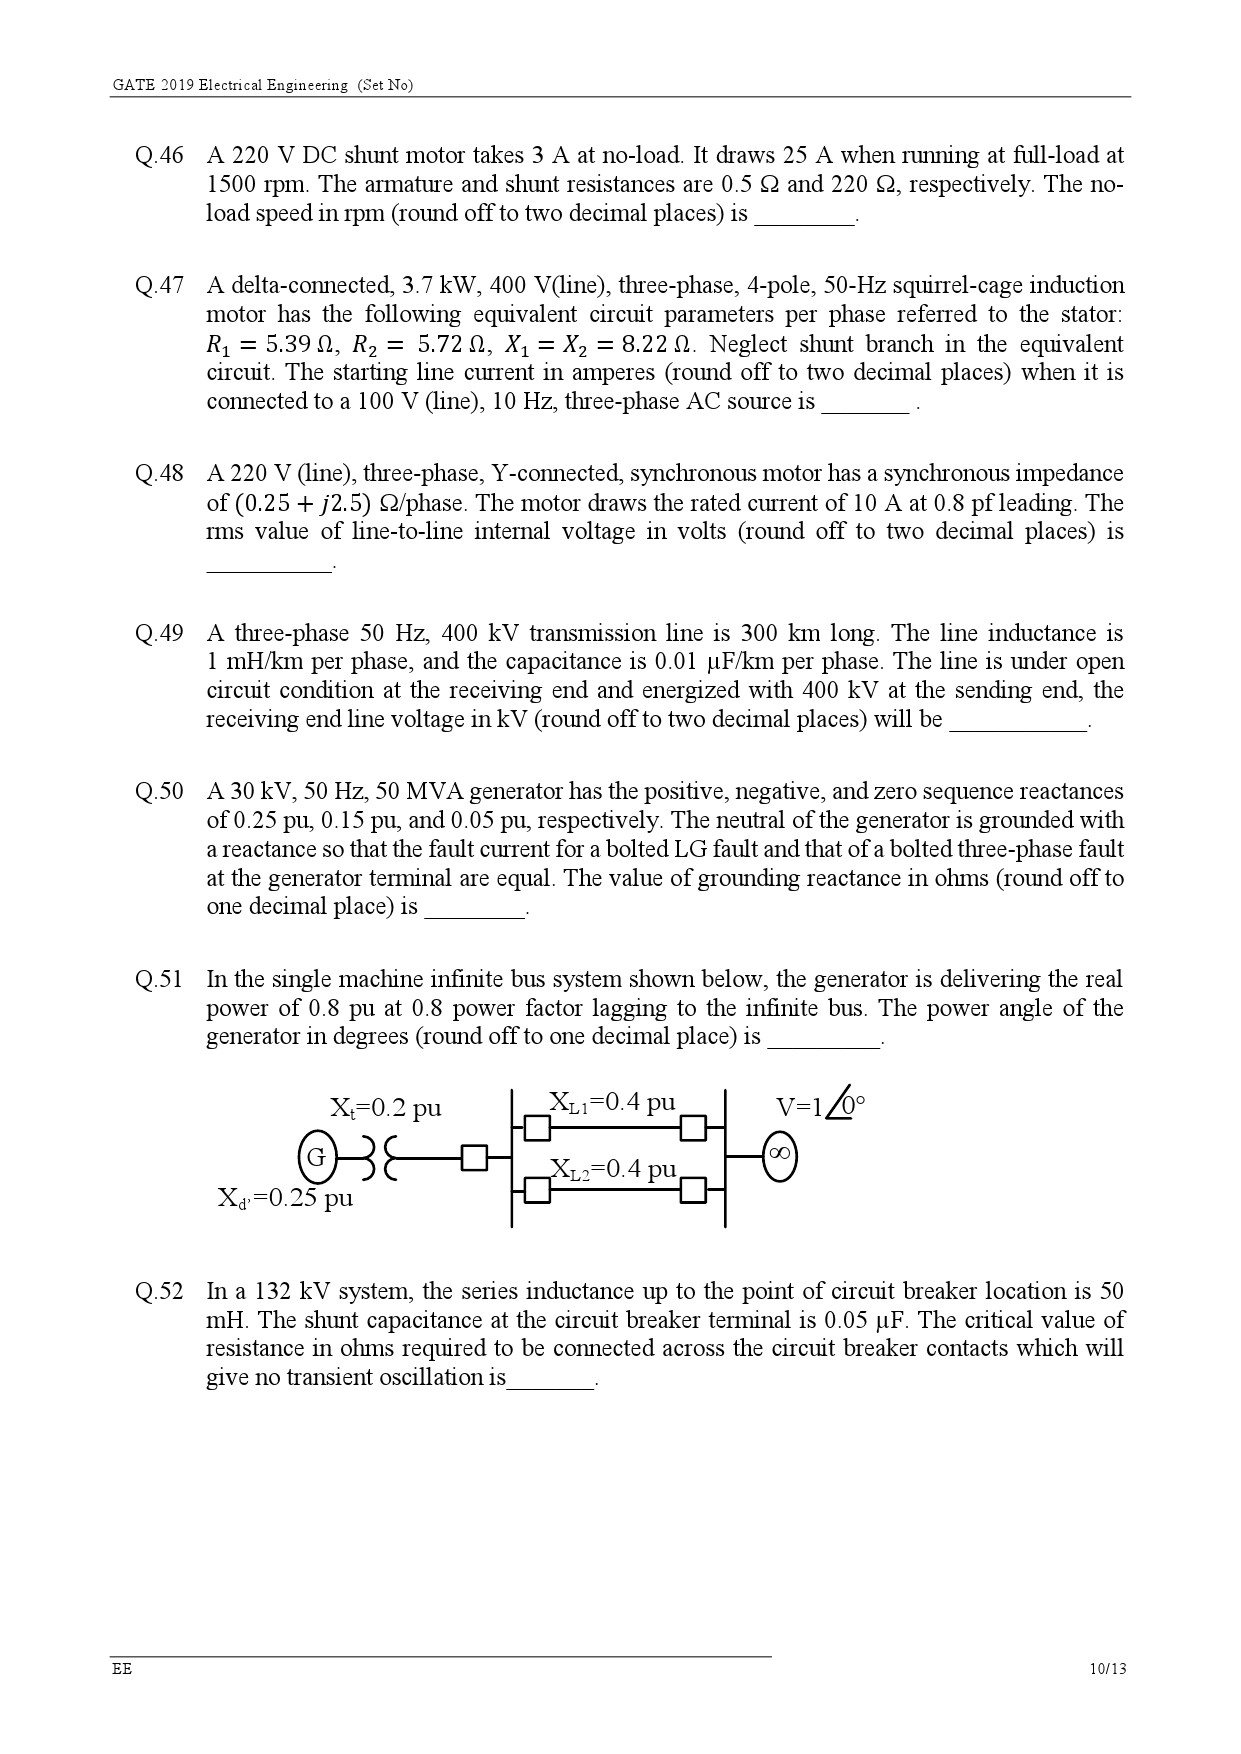 GATE Exam Question Paper 2019 Electrical Engineering 12